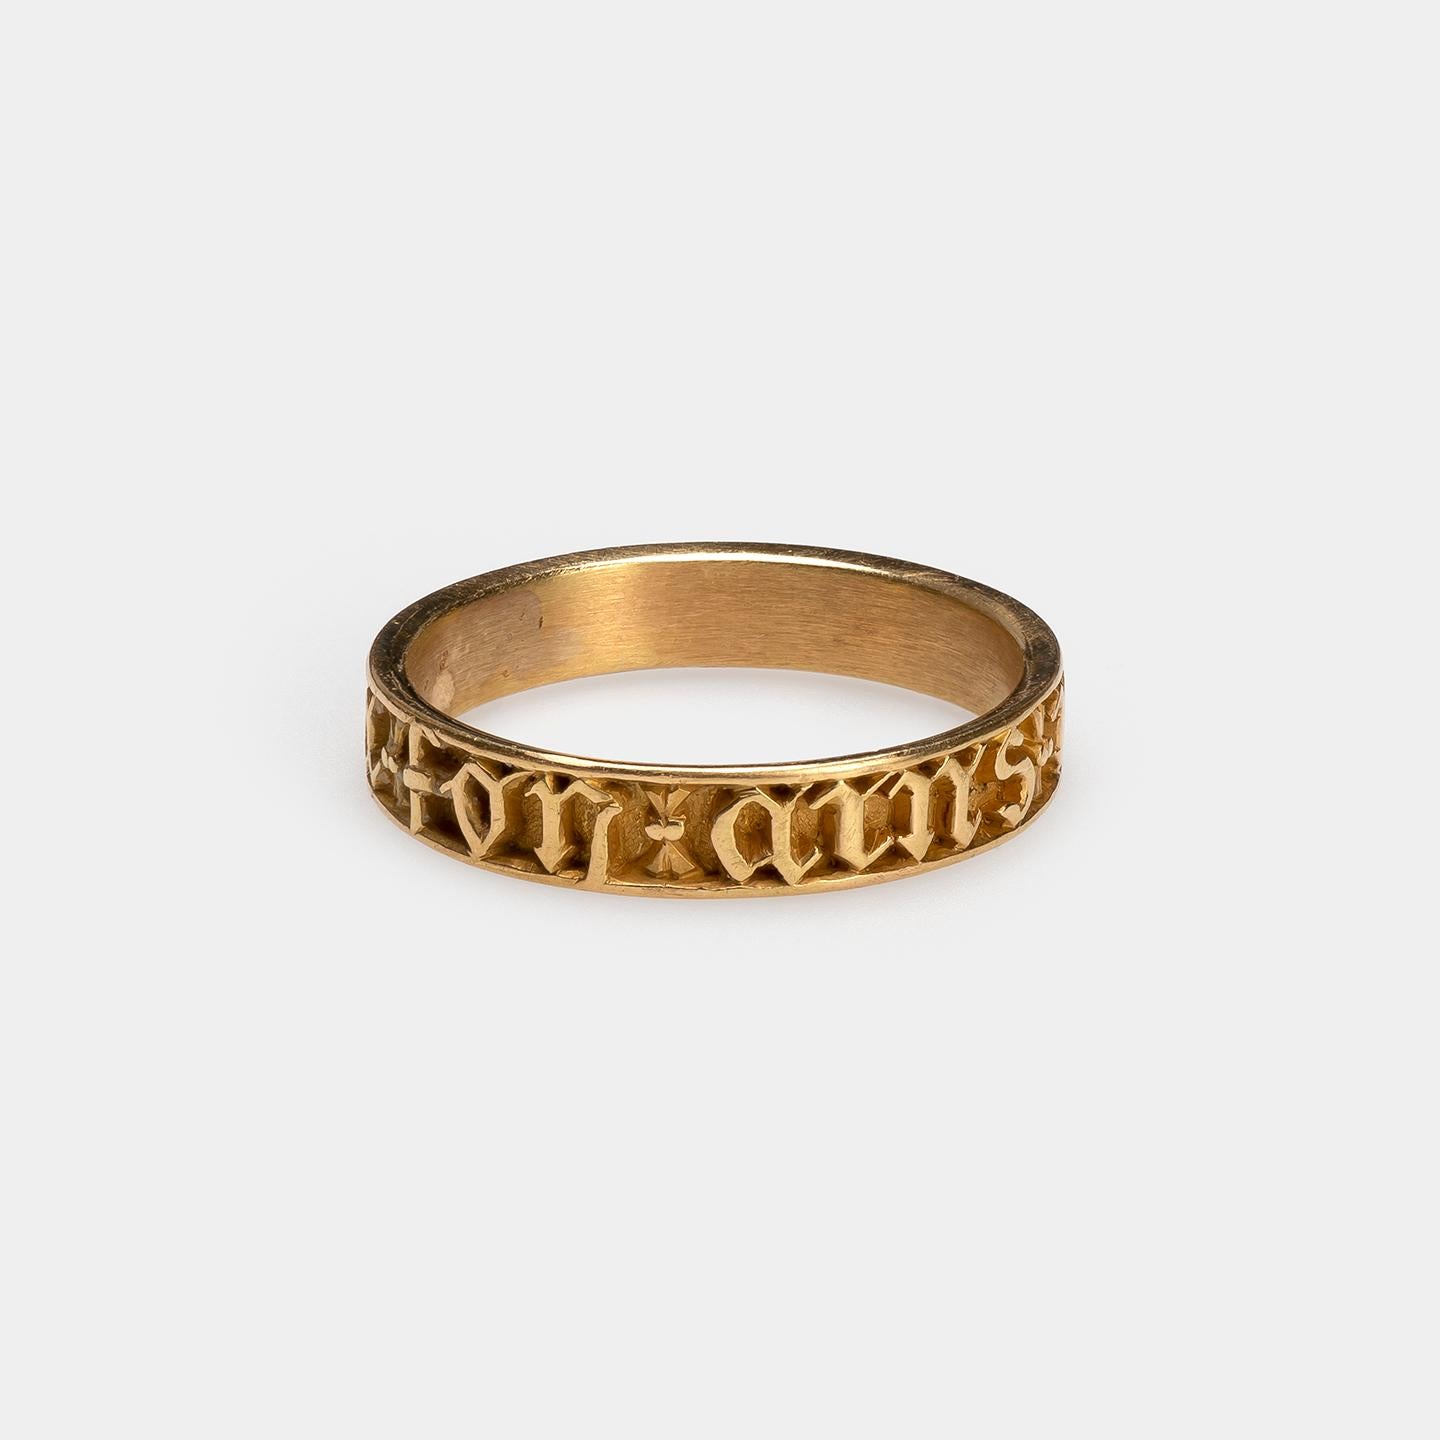 Neo-Gothic Ring with Inscription
Probably France, 19th century
Gold
Weight 3.9 gr; Circumference 61.29 mm; US size 9 3/4; UK size T

Charming Revival ring with Gothic lettering reminiscent of medieval manuscripts and jewelry

Plain gold band with a